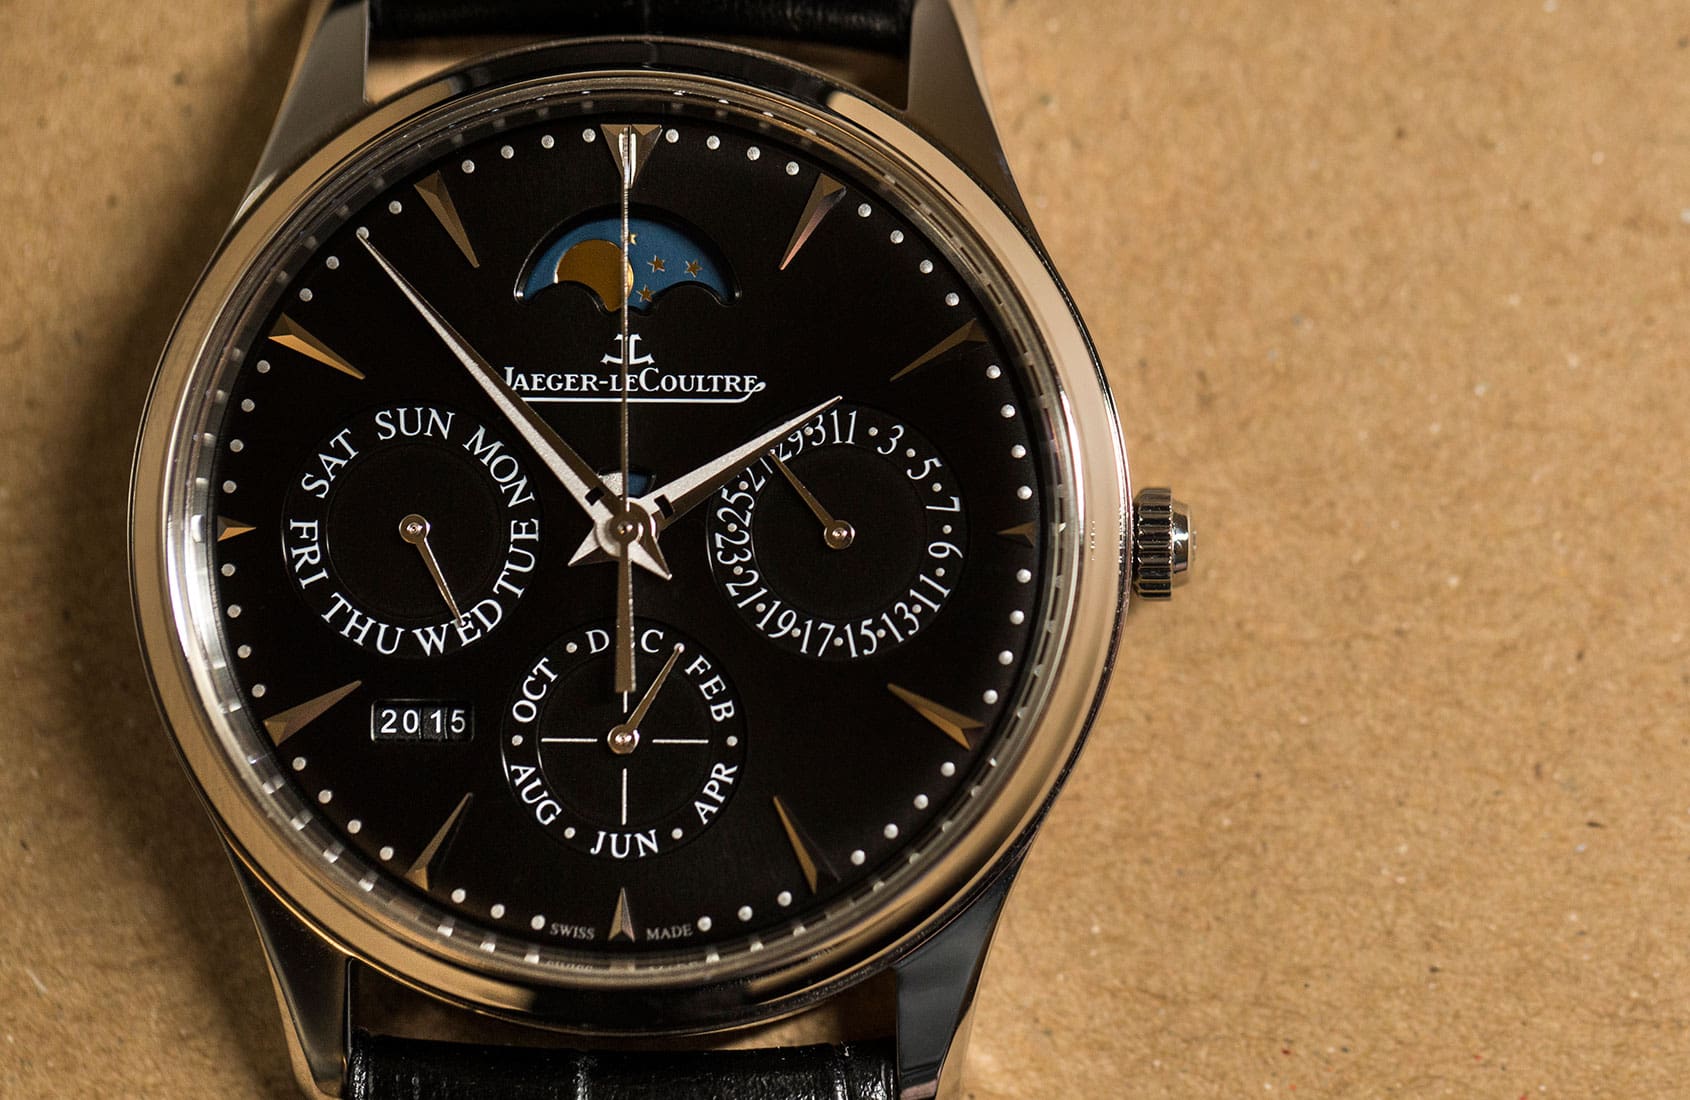 HANDS-ON: The Jaeger-LeCoultre Master Ultra Thin Perpetual Calendar, now in black